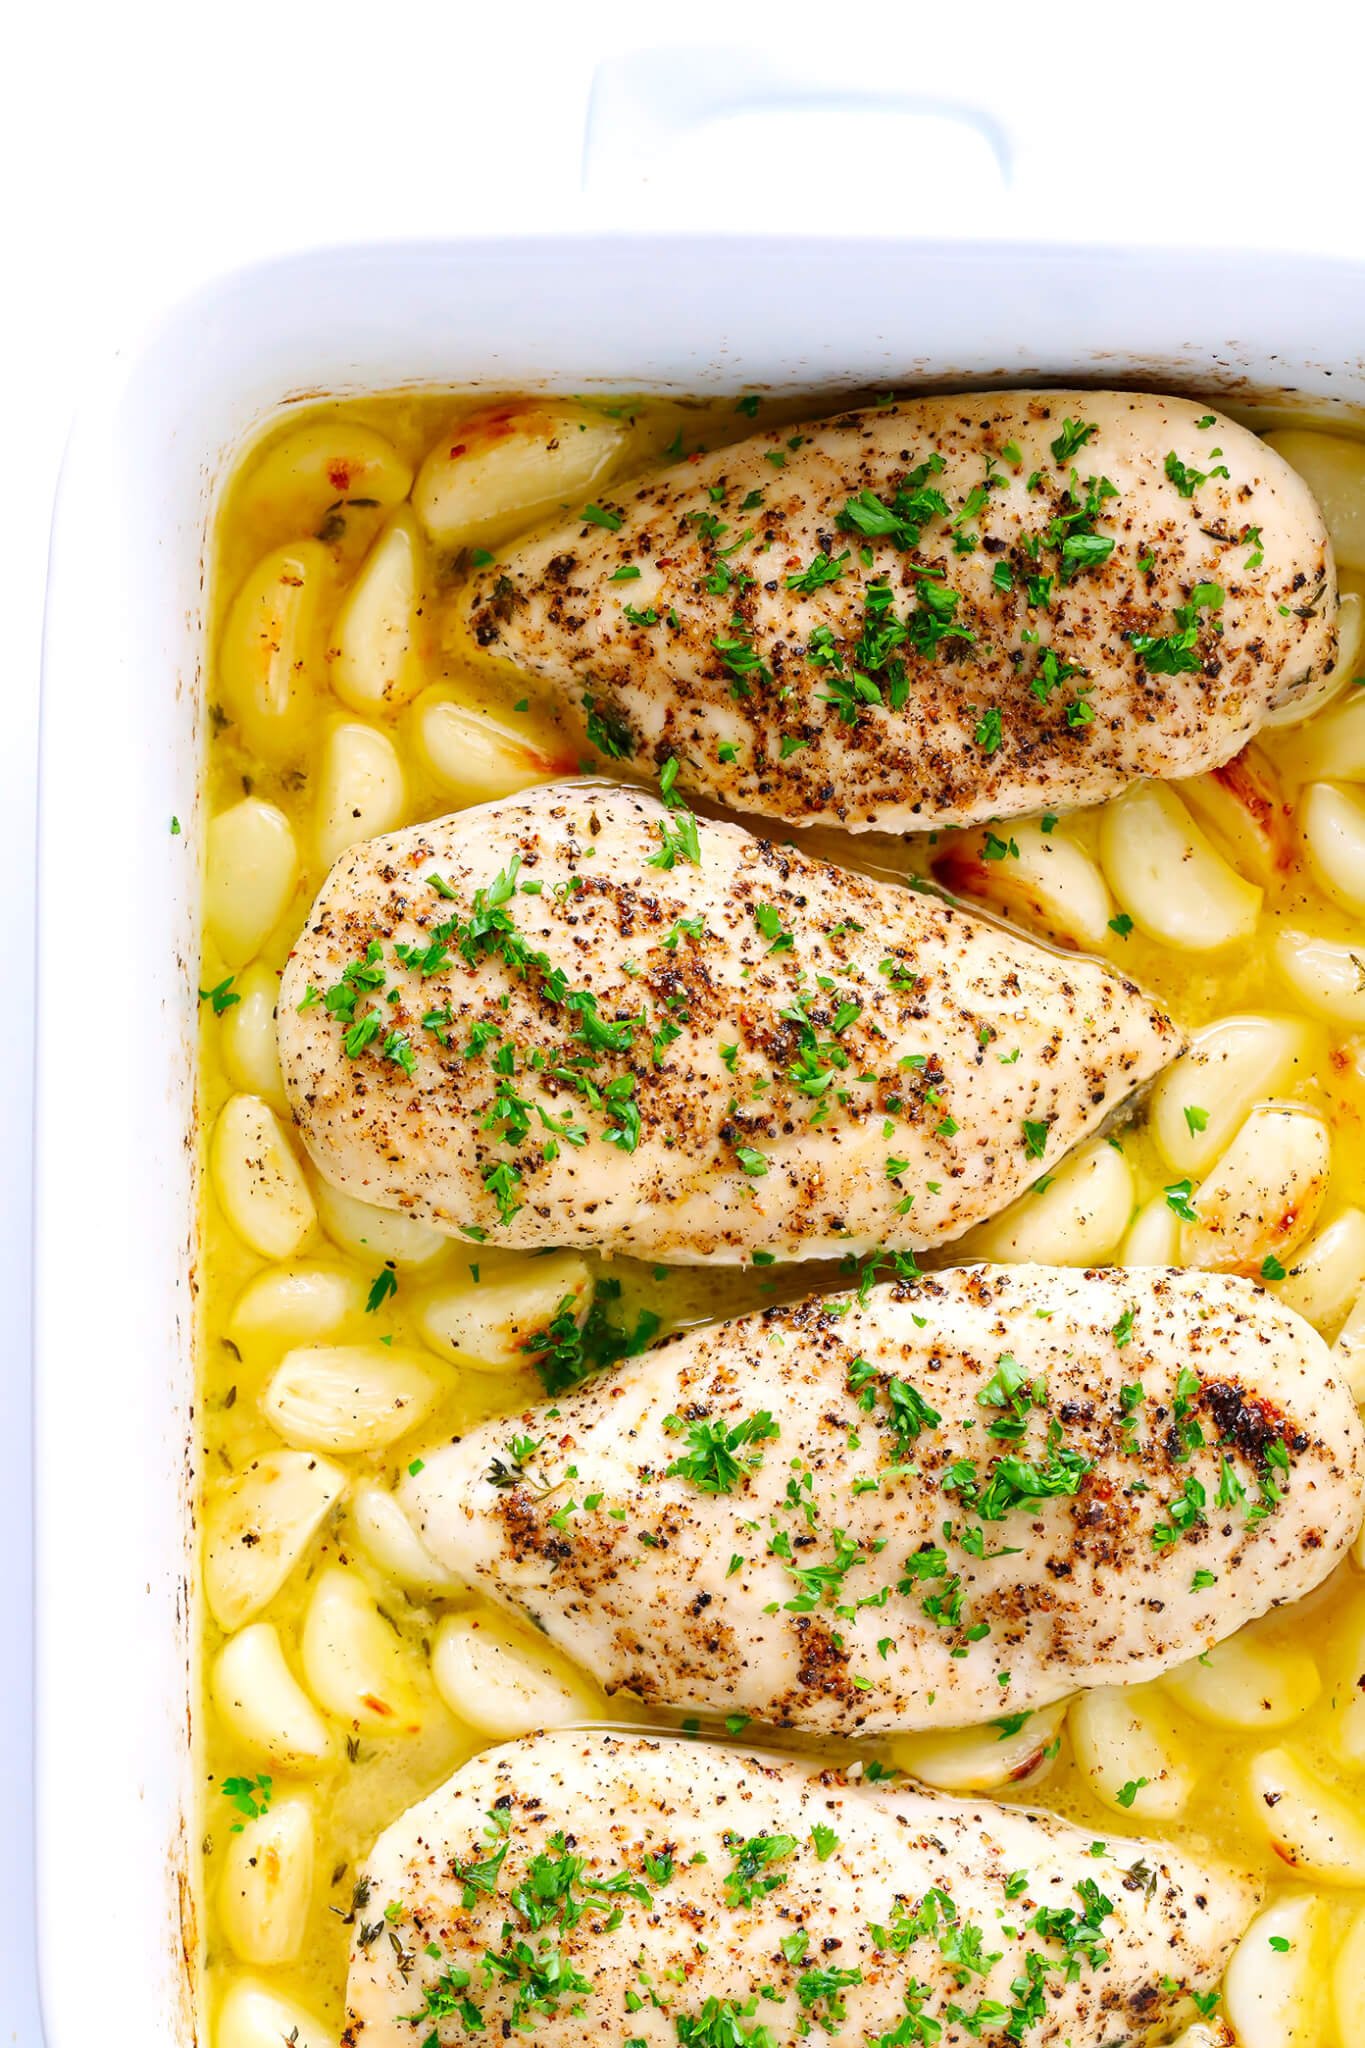 This Garlic Lovers Baked Chicken recipe is quick and easy to prepare, it's baked in the oven with a delicious lemon-butter sauce, and it's made with 40 cloves of garlic that are roasted to perfection. It's also naturally gluten-free, and SO delicious. An awesome weeknight dinner idea!